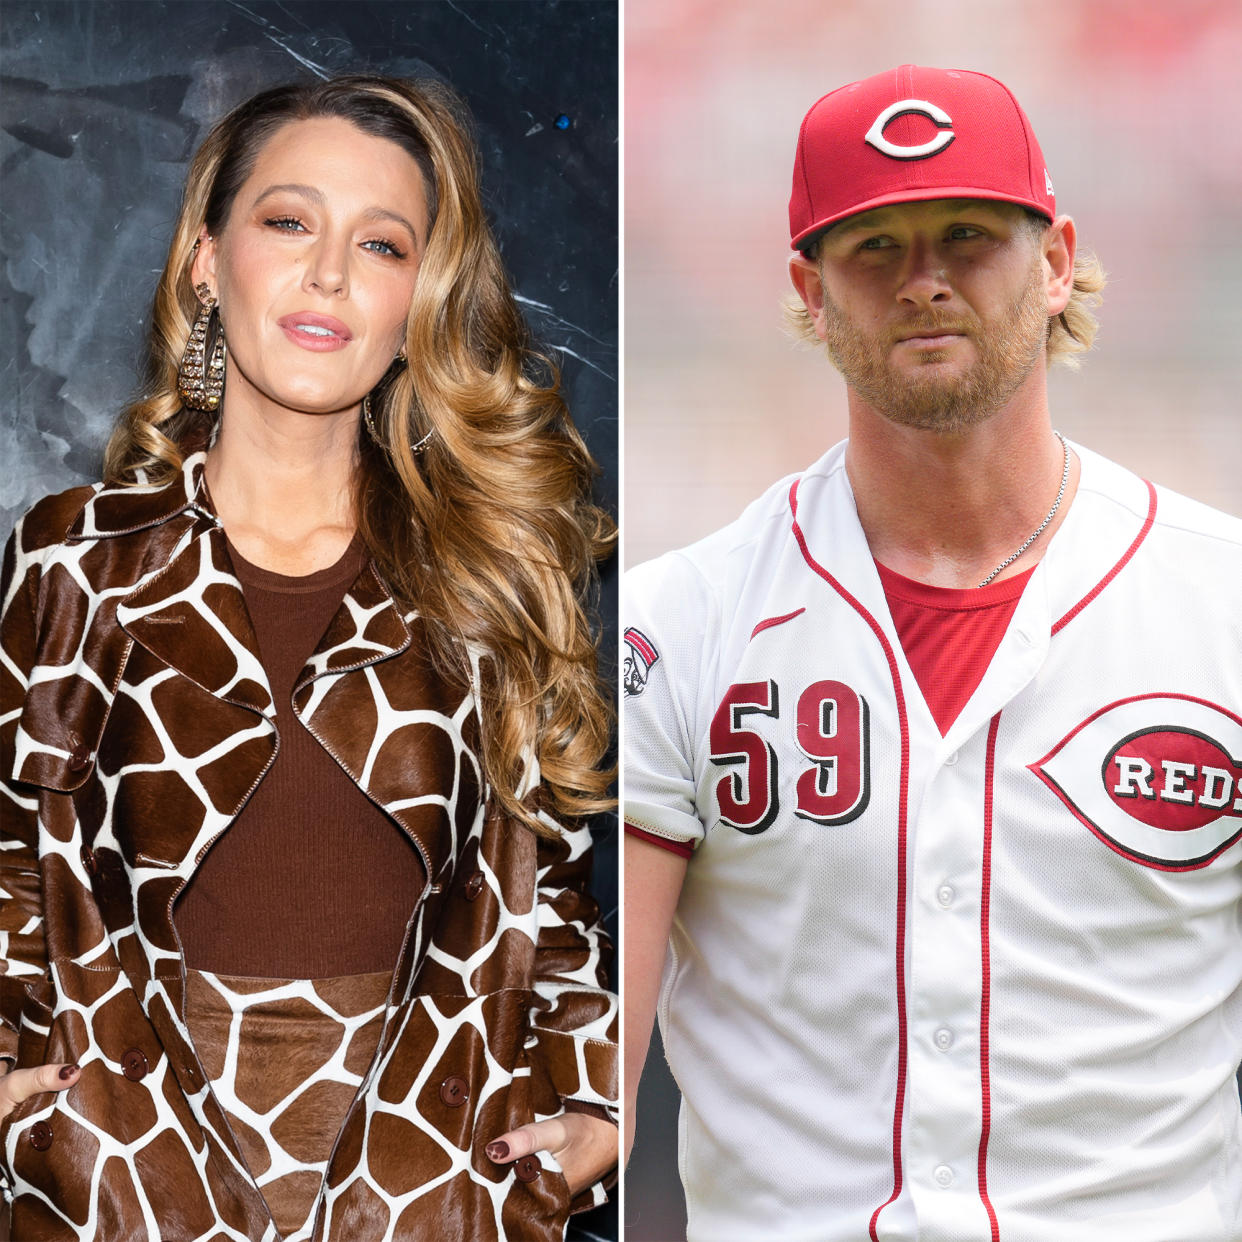 Blake Lively Reacts to Baseball Player Ben Lively Mistakenly Getting Called Blake